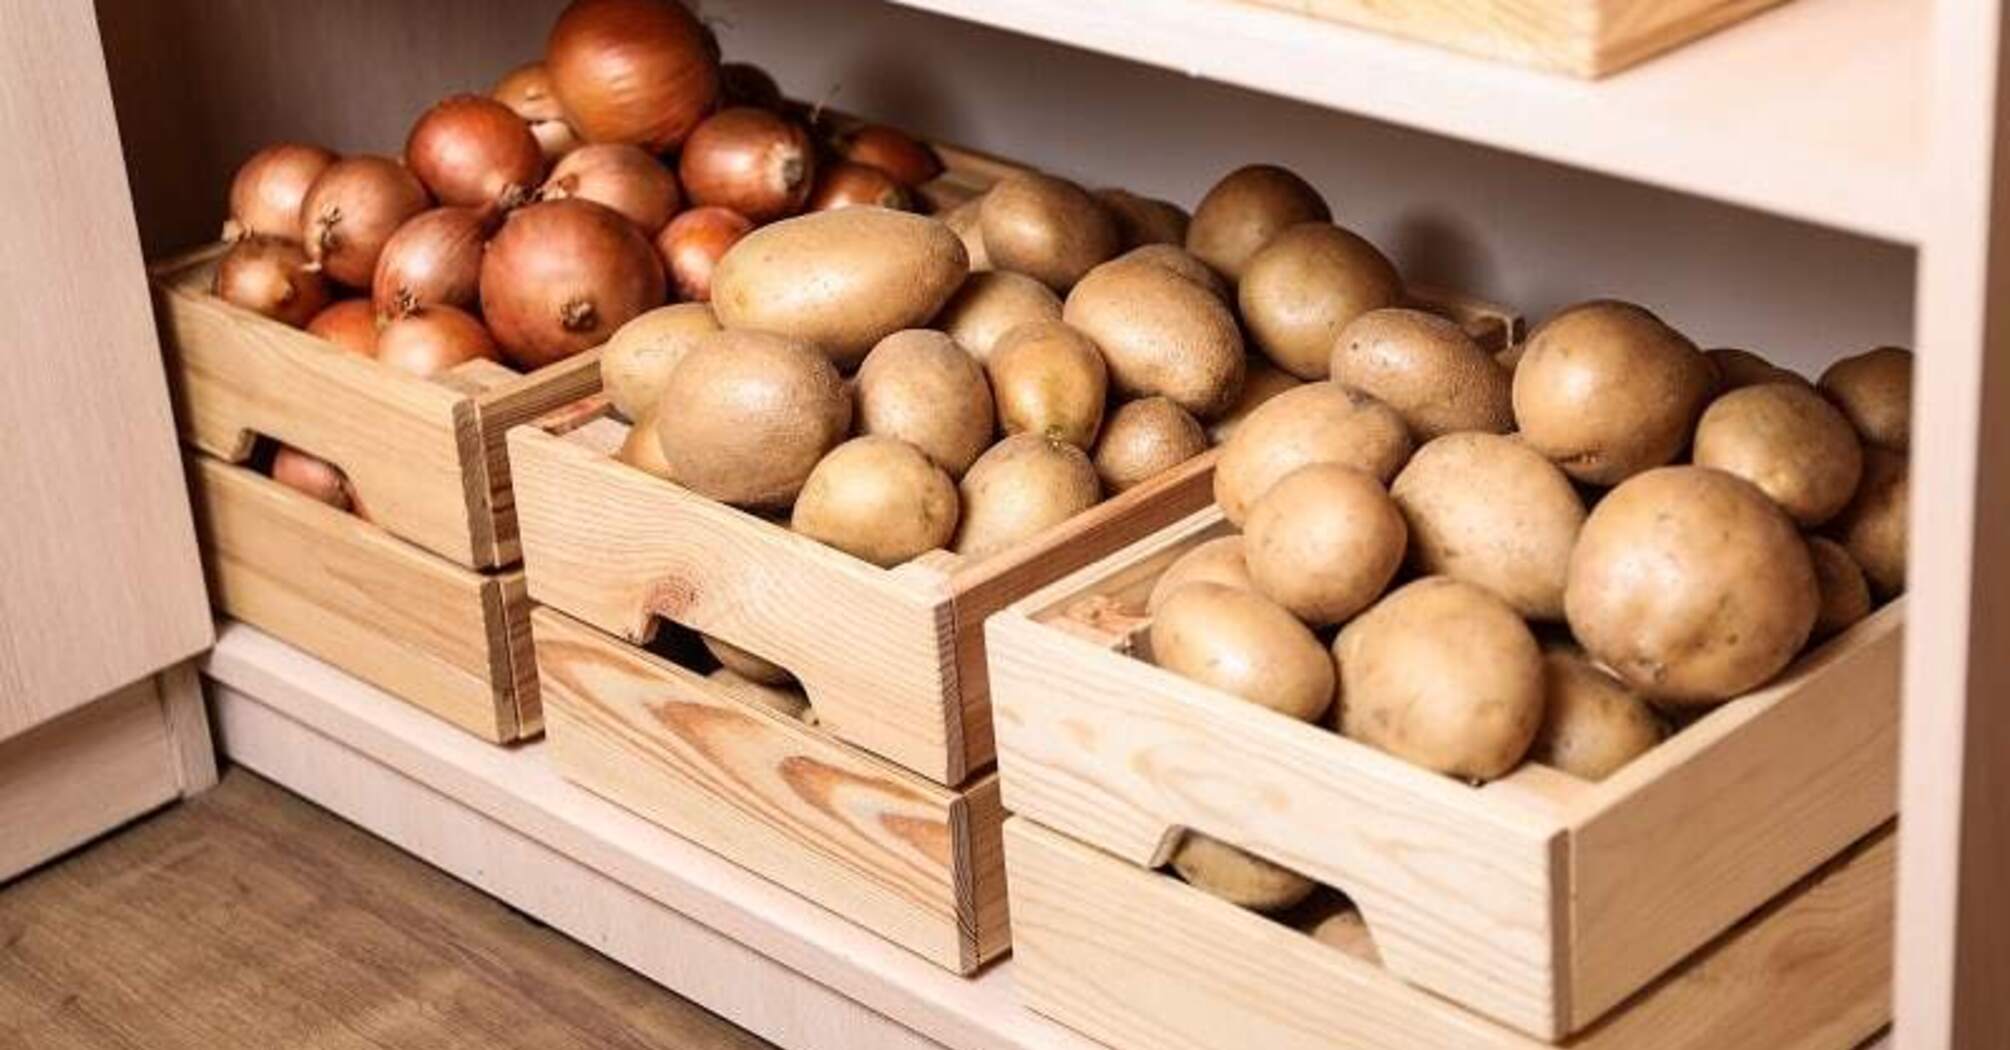 How to store potatoes and vegetables in an apartment